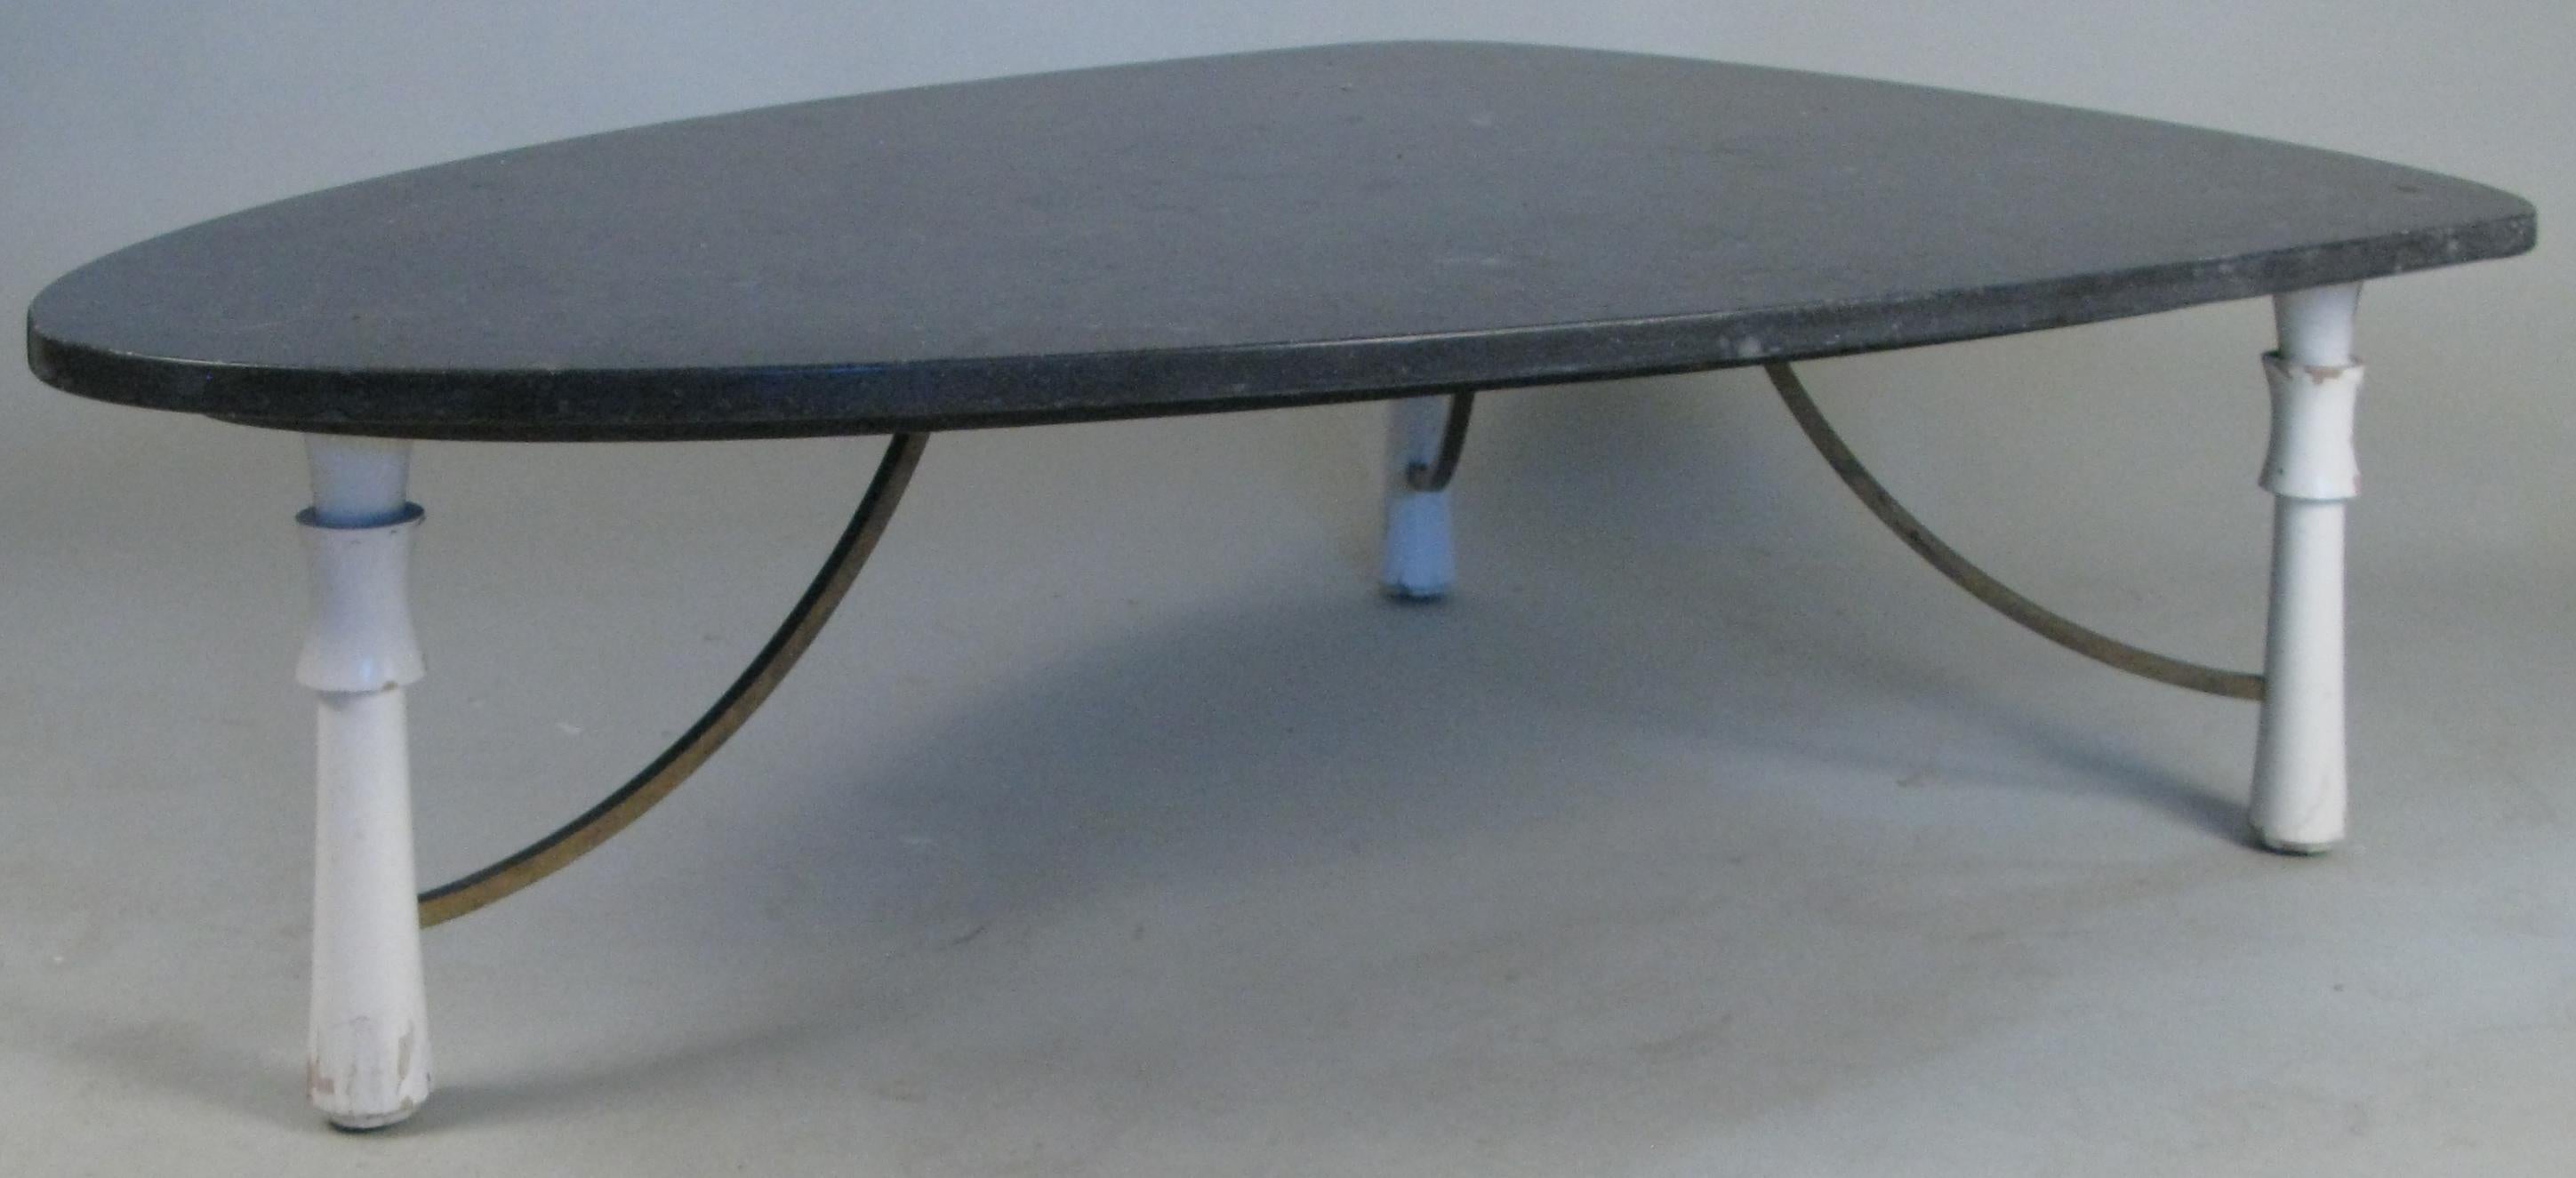 A beautiful 1950s triangular marble top cocktail table, with three leg base, the turned legs connected with brass supports. The dark grey marble top is in a triangle form with curved corners.